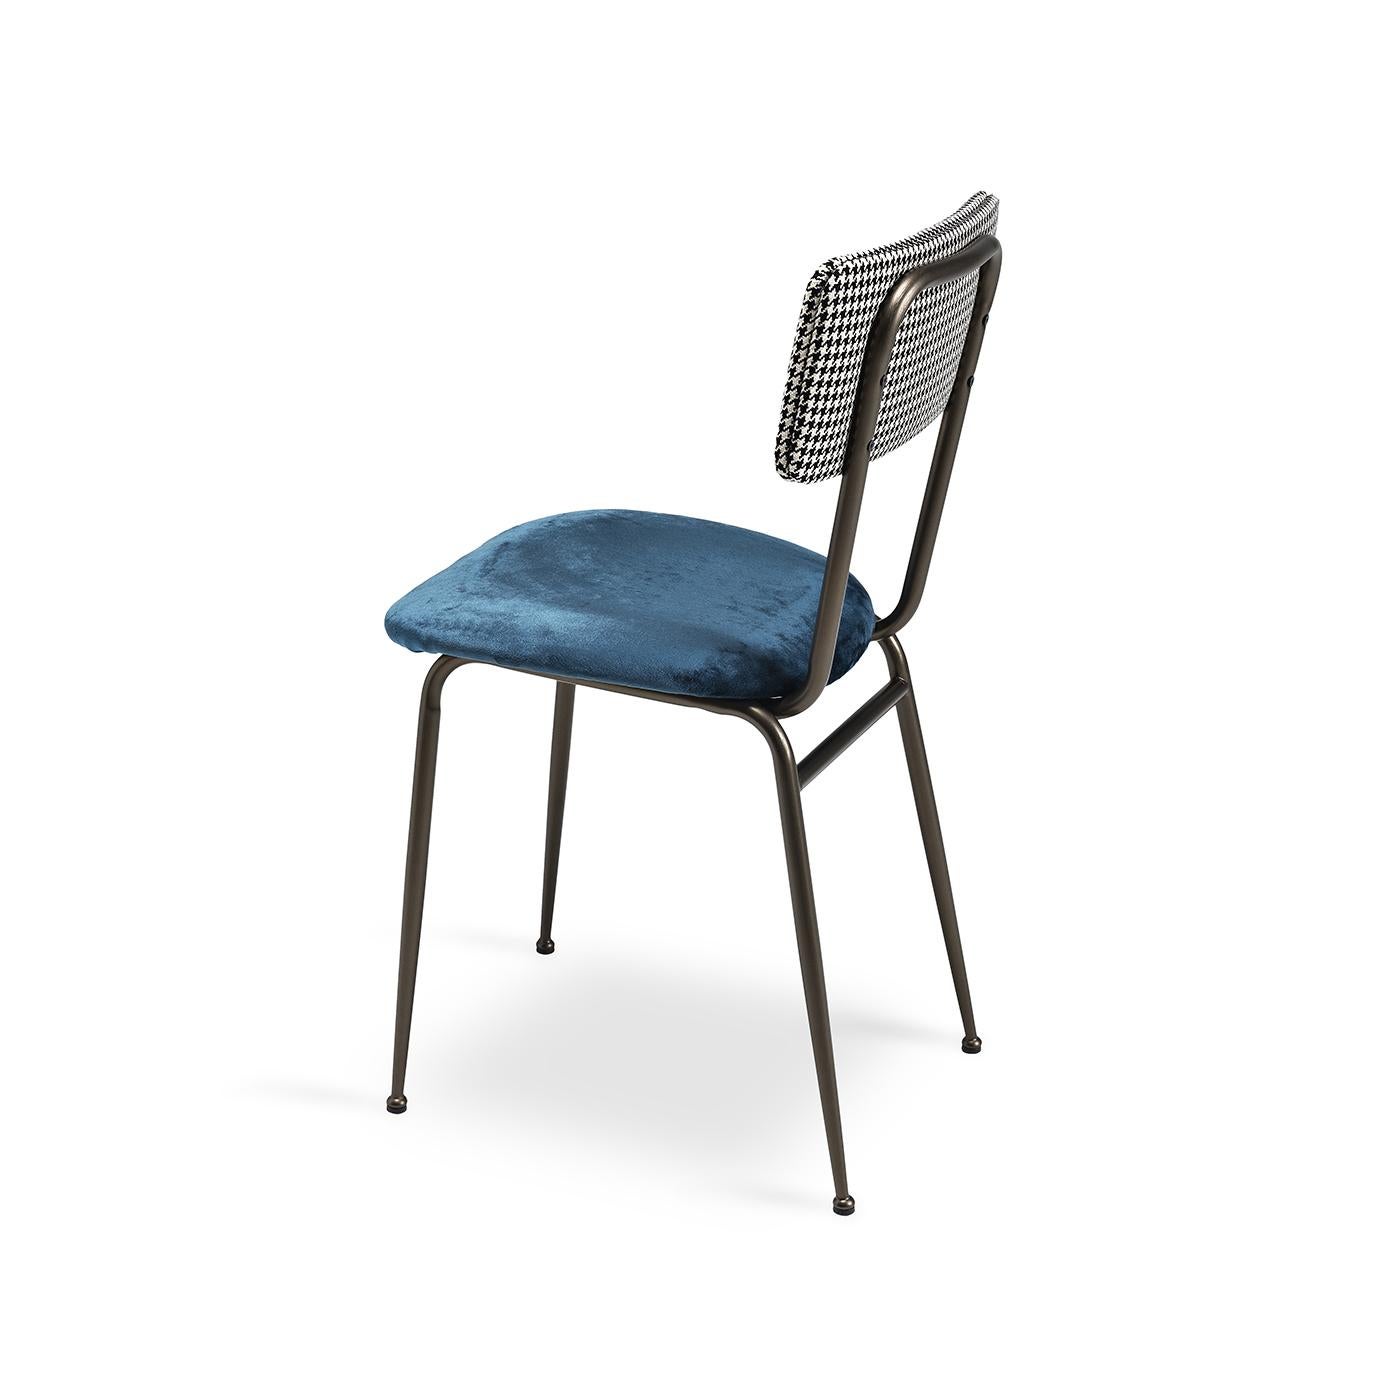 This dining chair will add vintage charm to any dining setting. This piece has a streamlined metal frame with a brushed bronze metallic finish. The seat is upholstered in non-removable dark blue velvet, while the back is covered in a non-removable